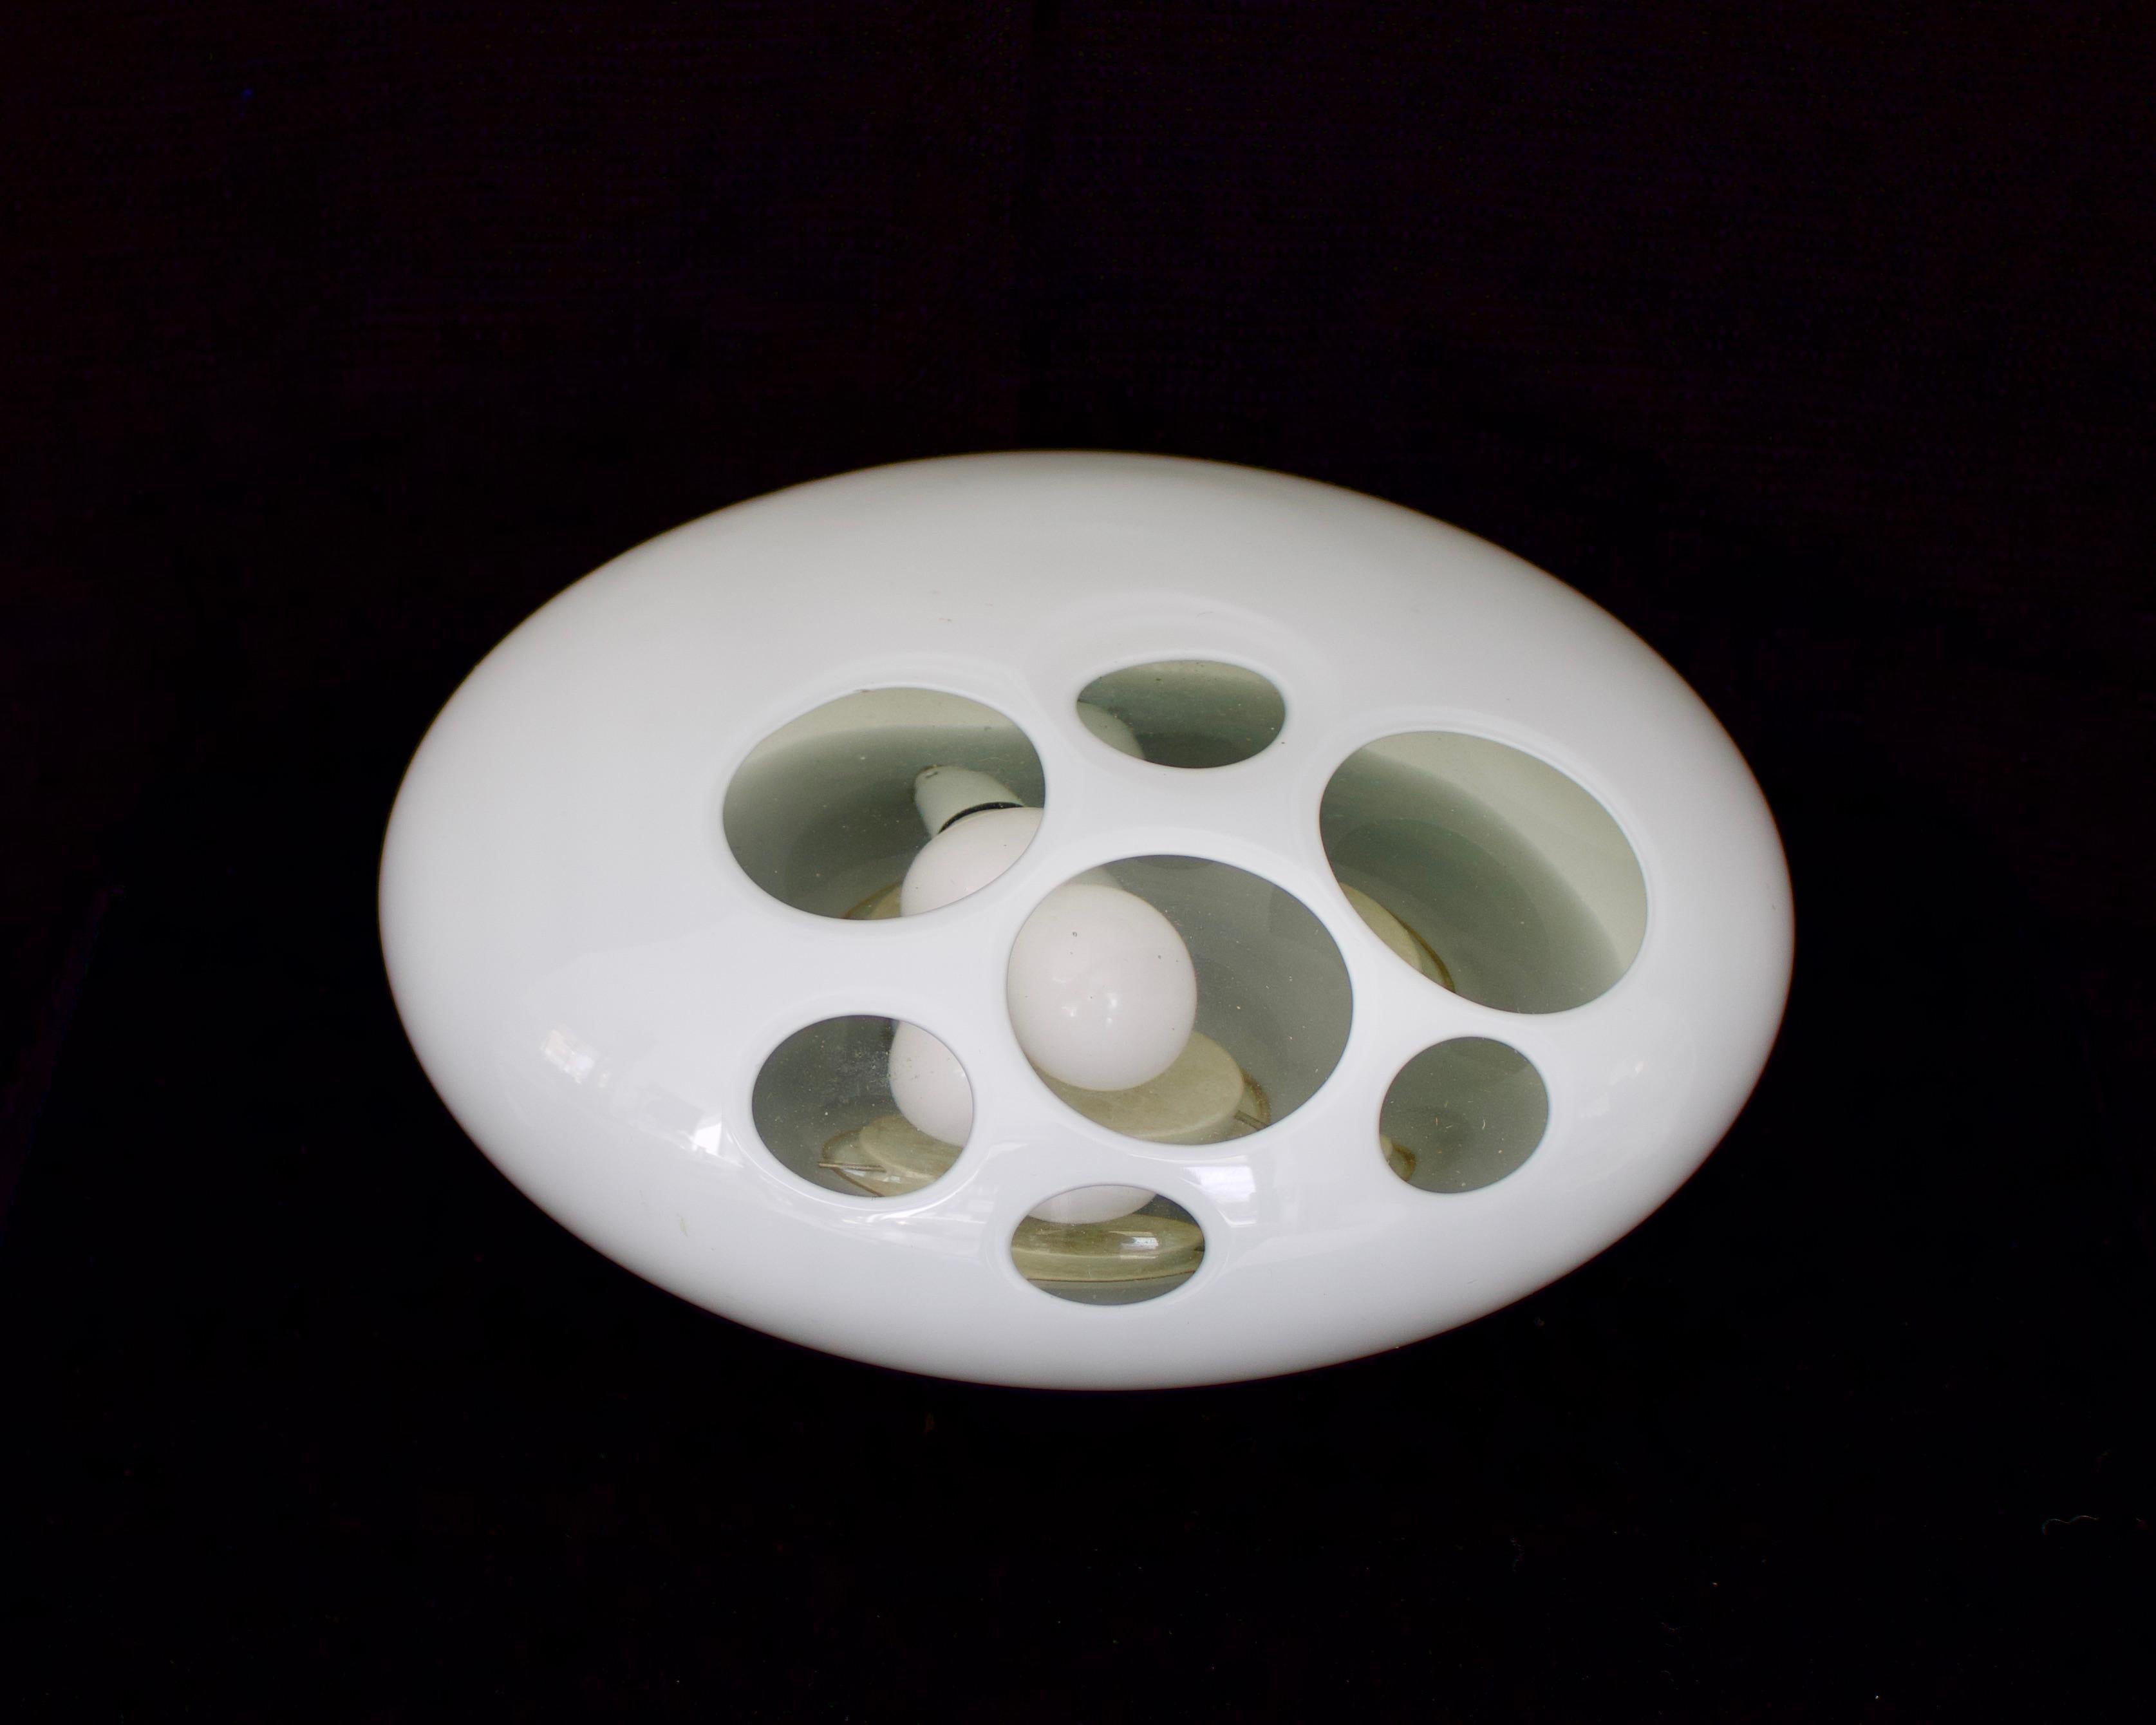 Carlo Nason Moon Base Lamp Model LT 357 in opaque and clear glass. The polished circular round windows allow the diffused light to emit like the moon. The opaque glass glows like the moon at night. 
Nason came from a glassmaker family in Murano.